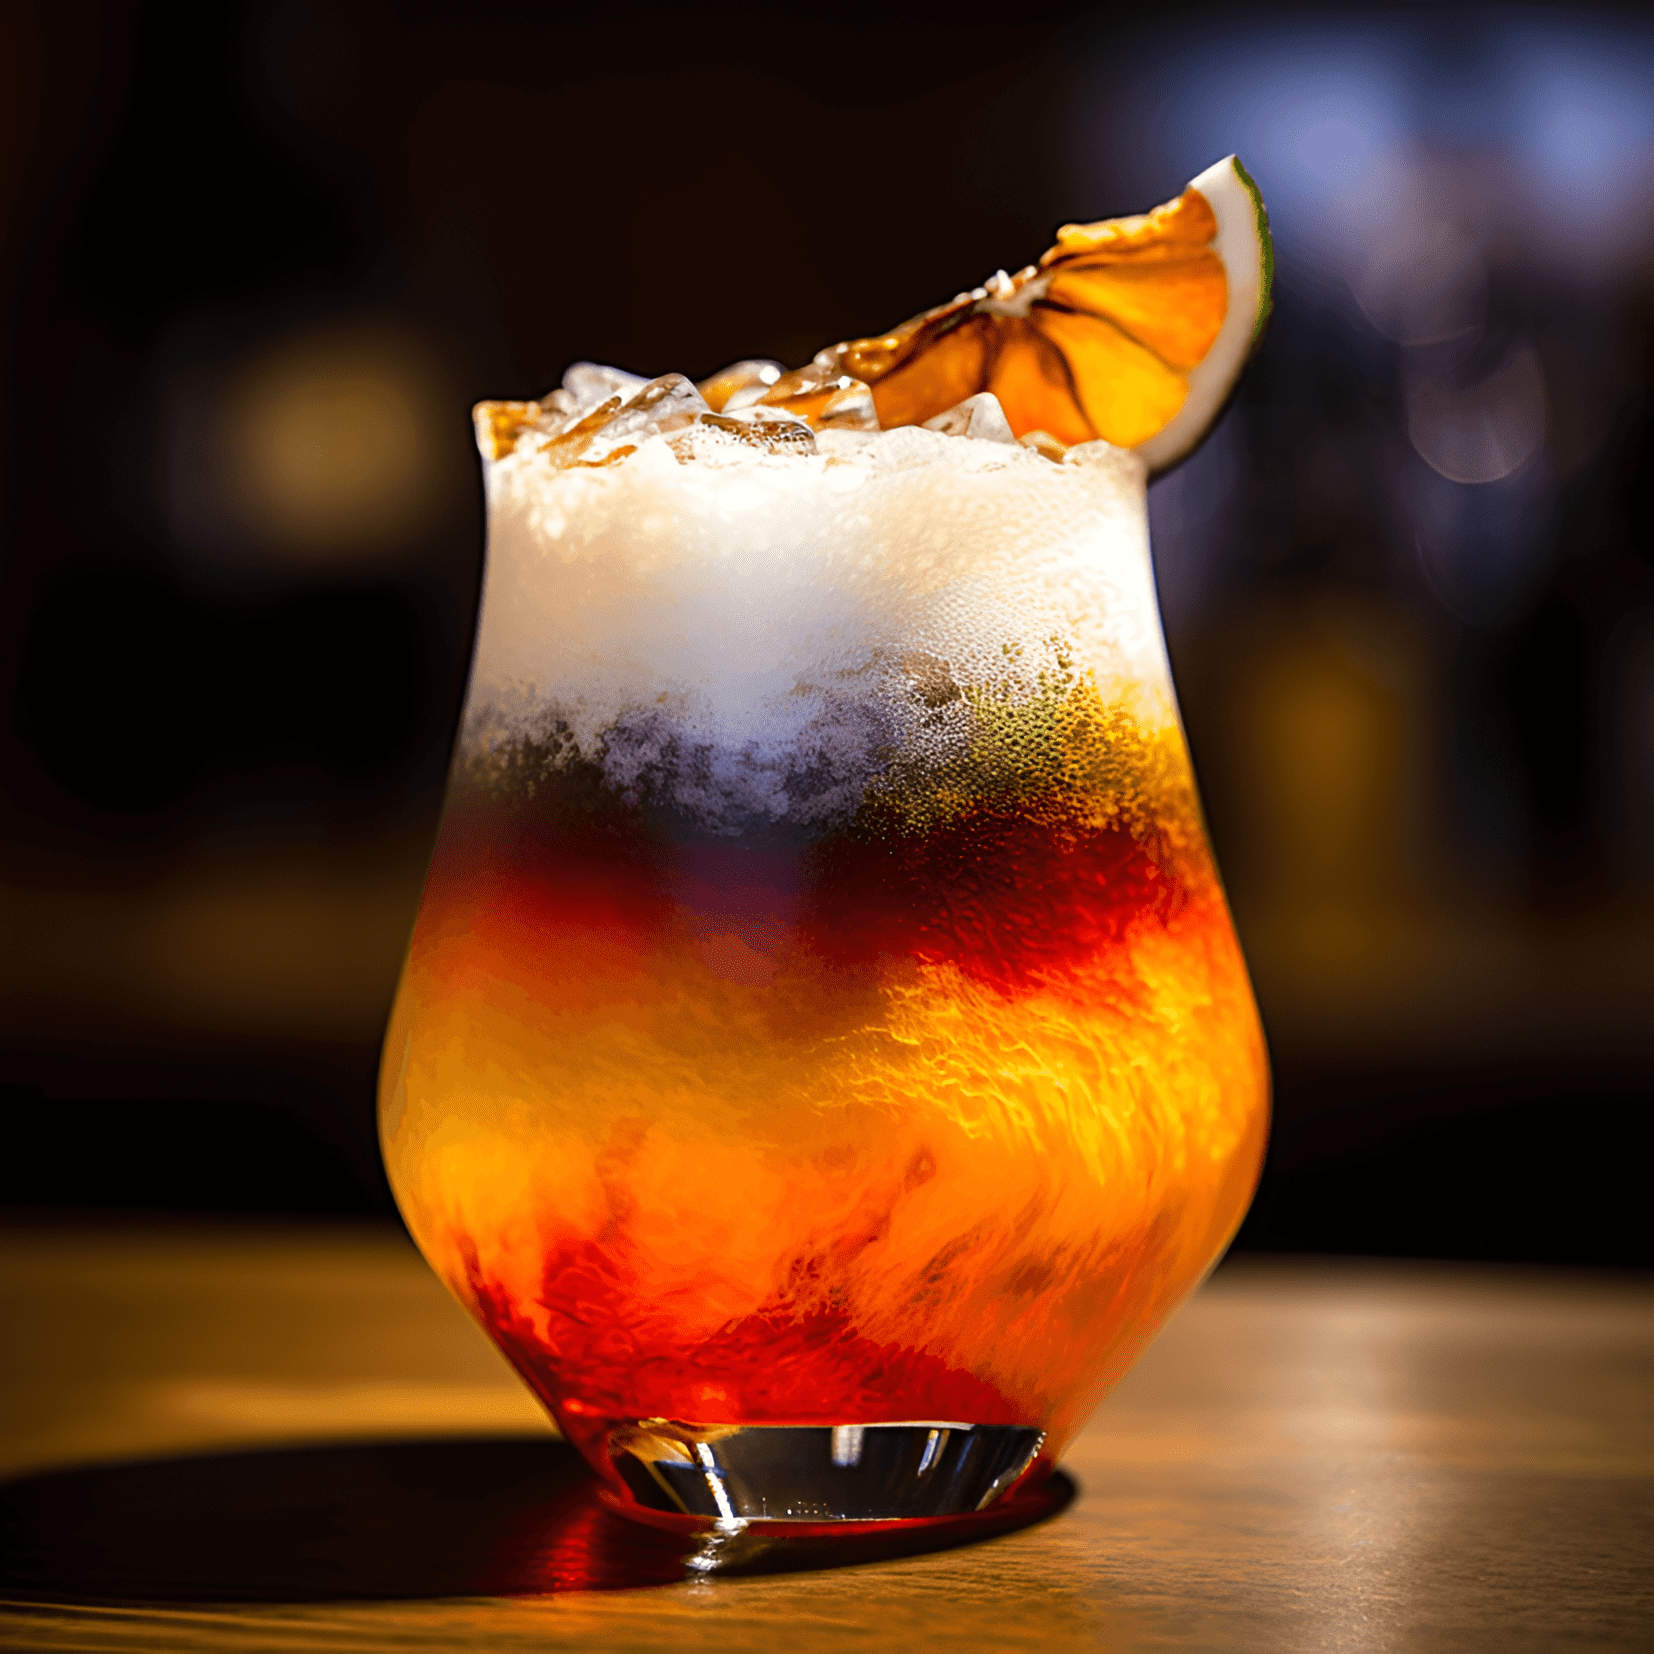 Undertow Cocktail Recipe - The Undertow cocktail is a delightful mix of sweet, sour, and slightly bitter flavors. It has a strong, yet refreshing taste, with hints of tropical fruit, citrus, and spice. The combination of rum and fruit juices creates a smooth, well-balanced drink that is both invigorating and satisfying.